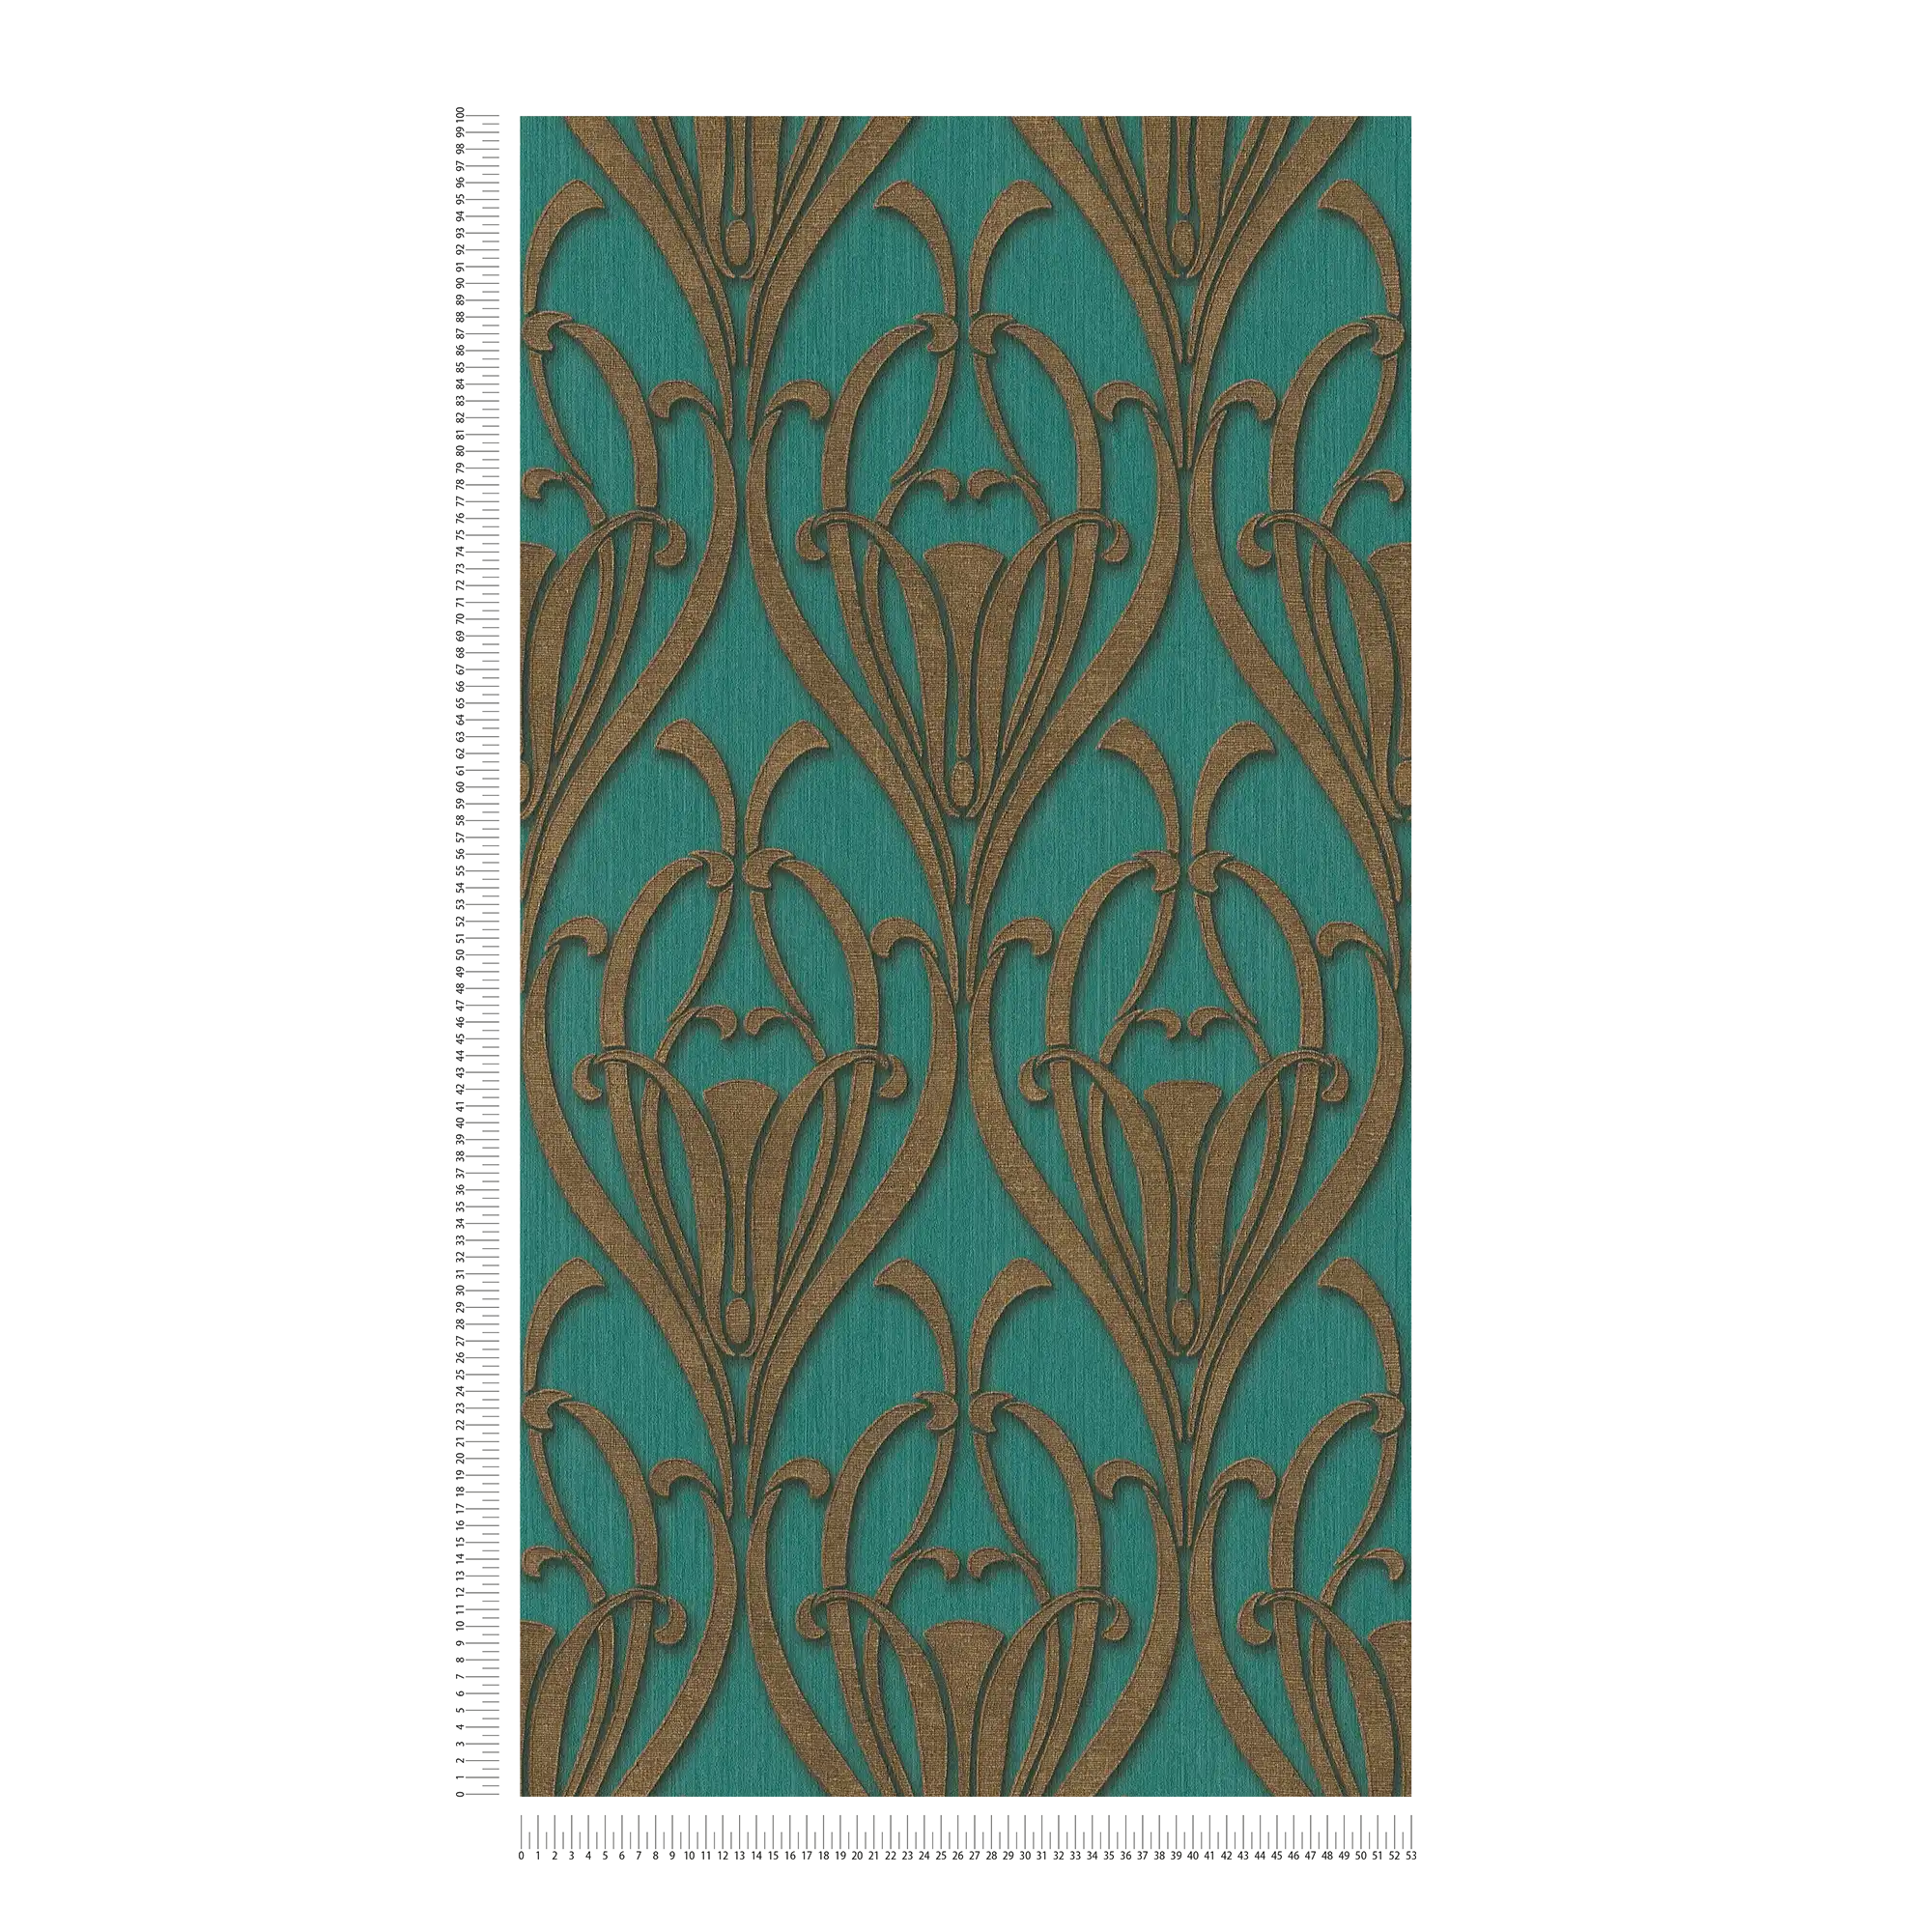             Art Deco wallpaper petrol & gold pattern with texture effect
        